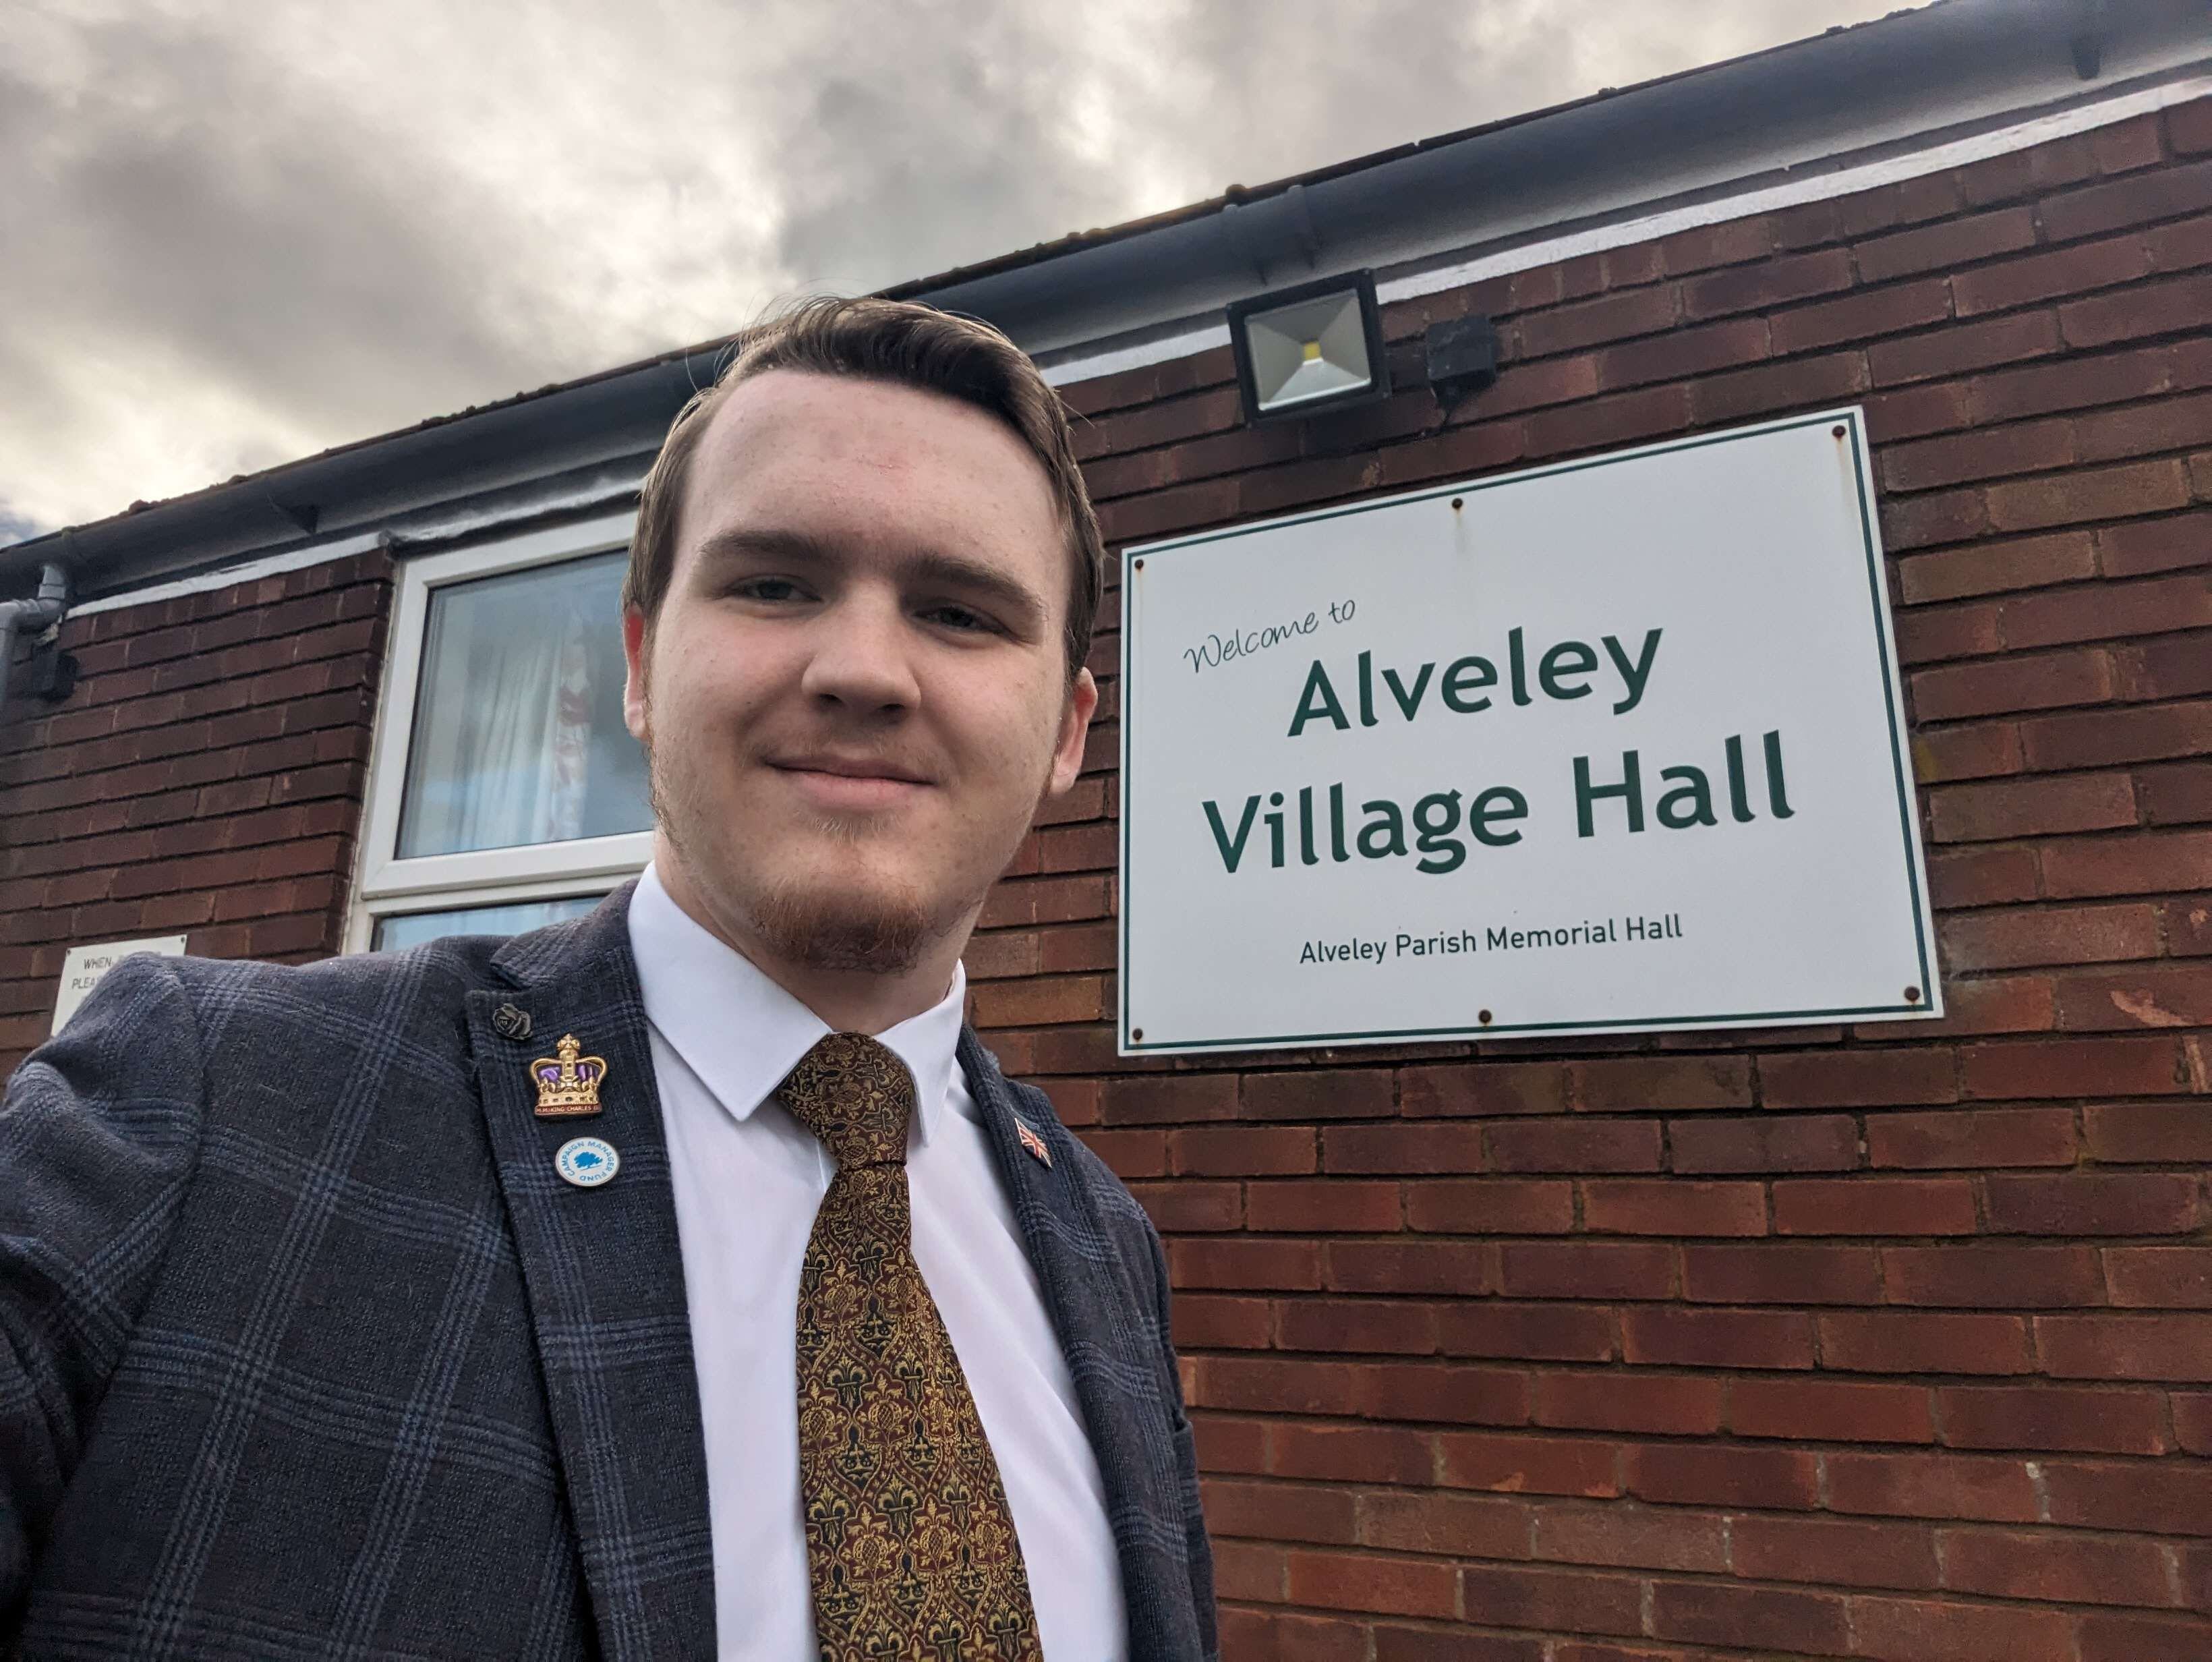 Student, 18, becomes one of the country's youngest councillors